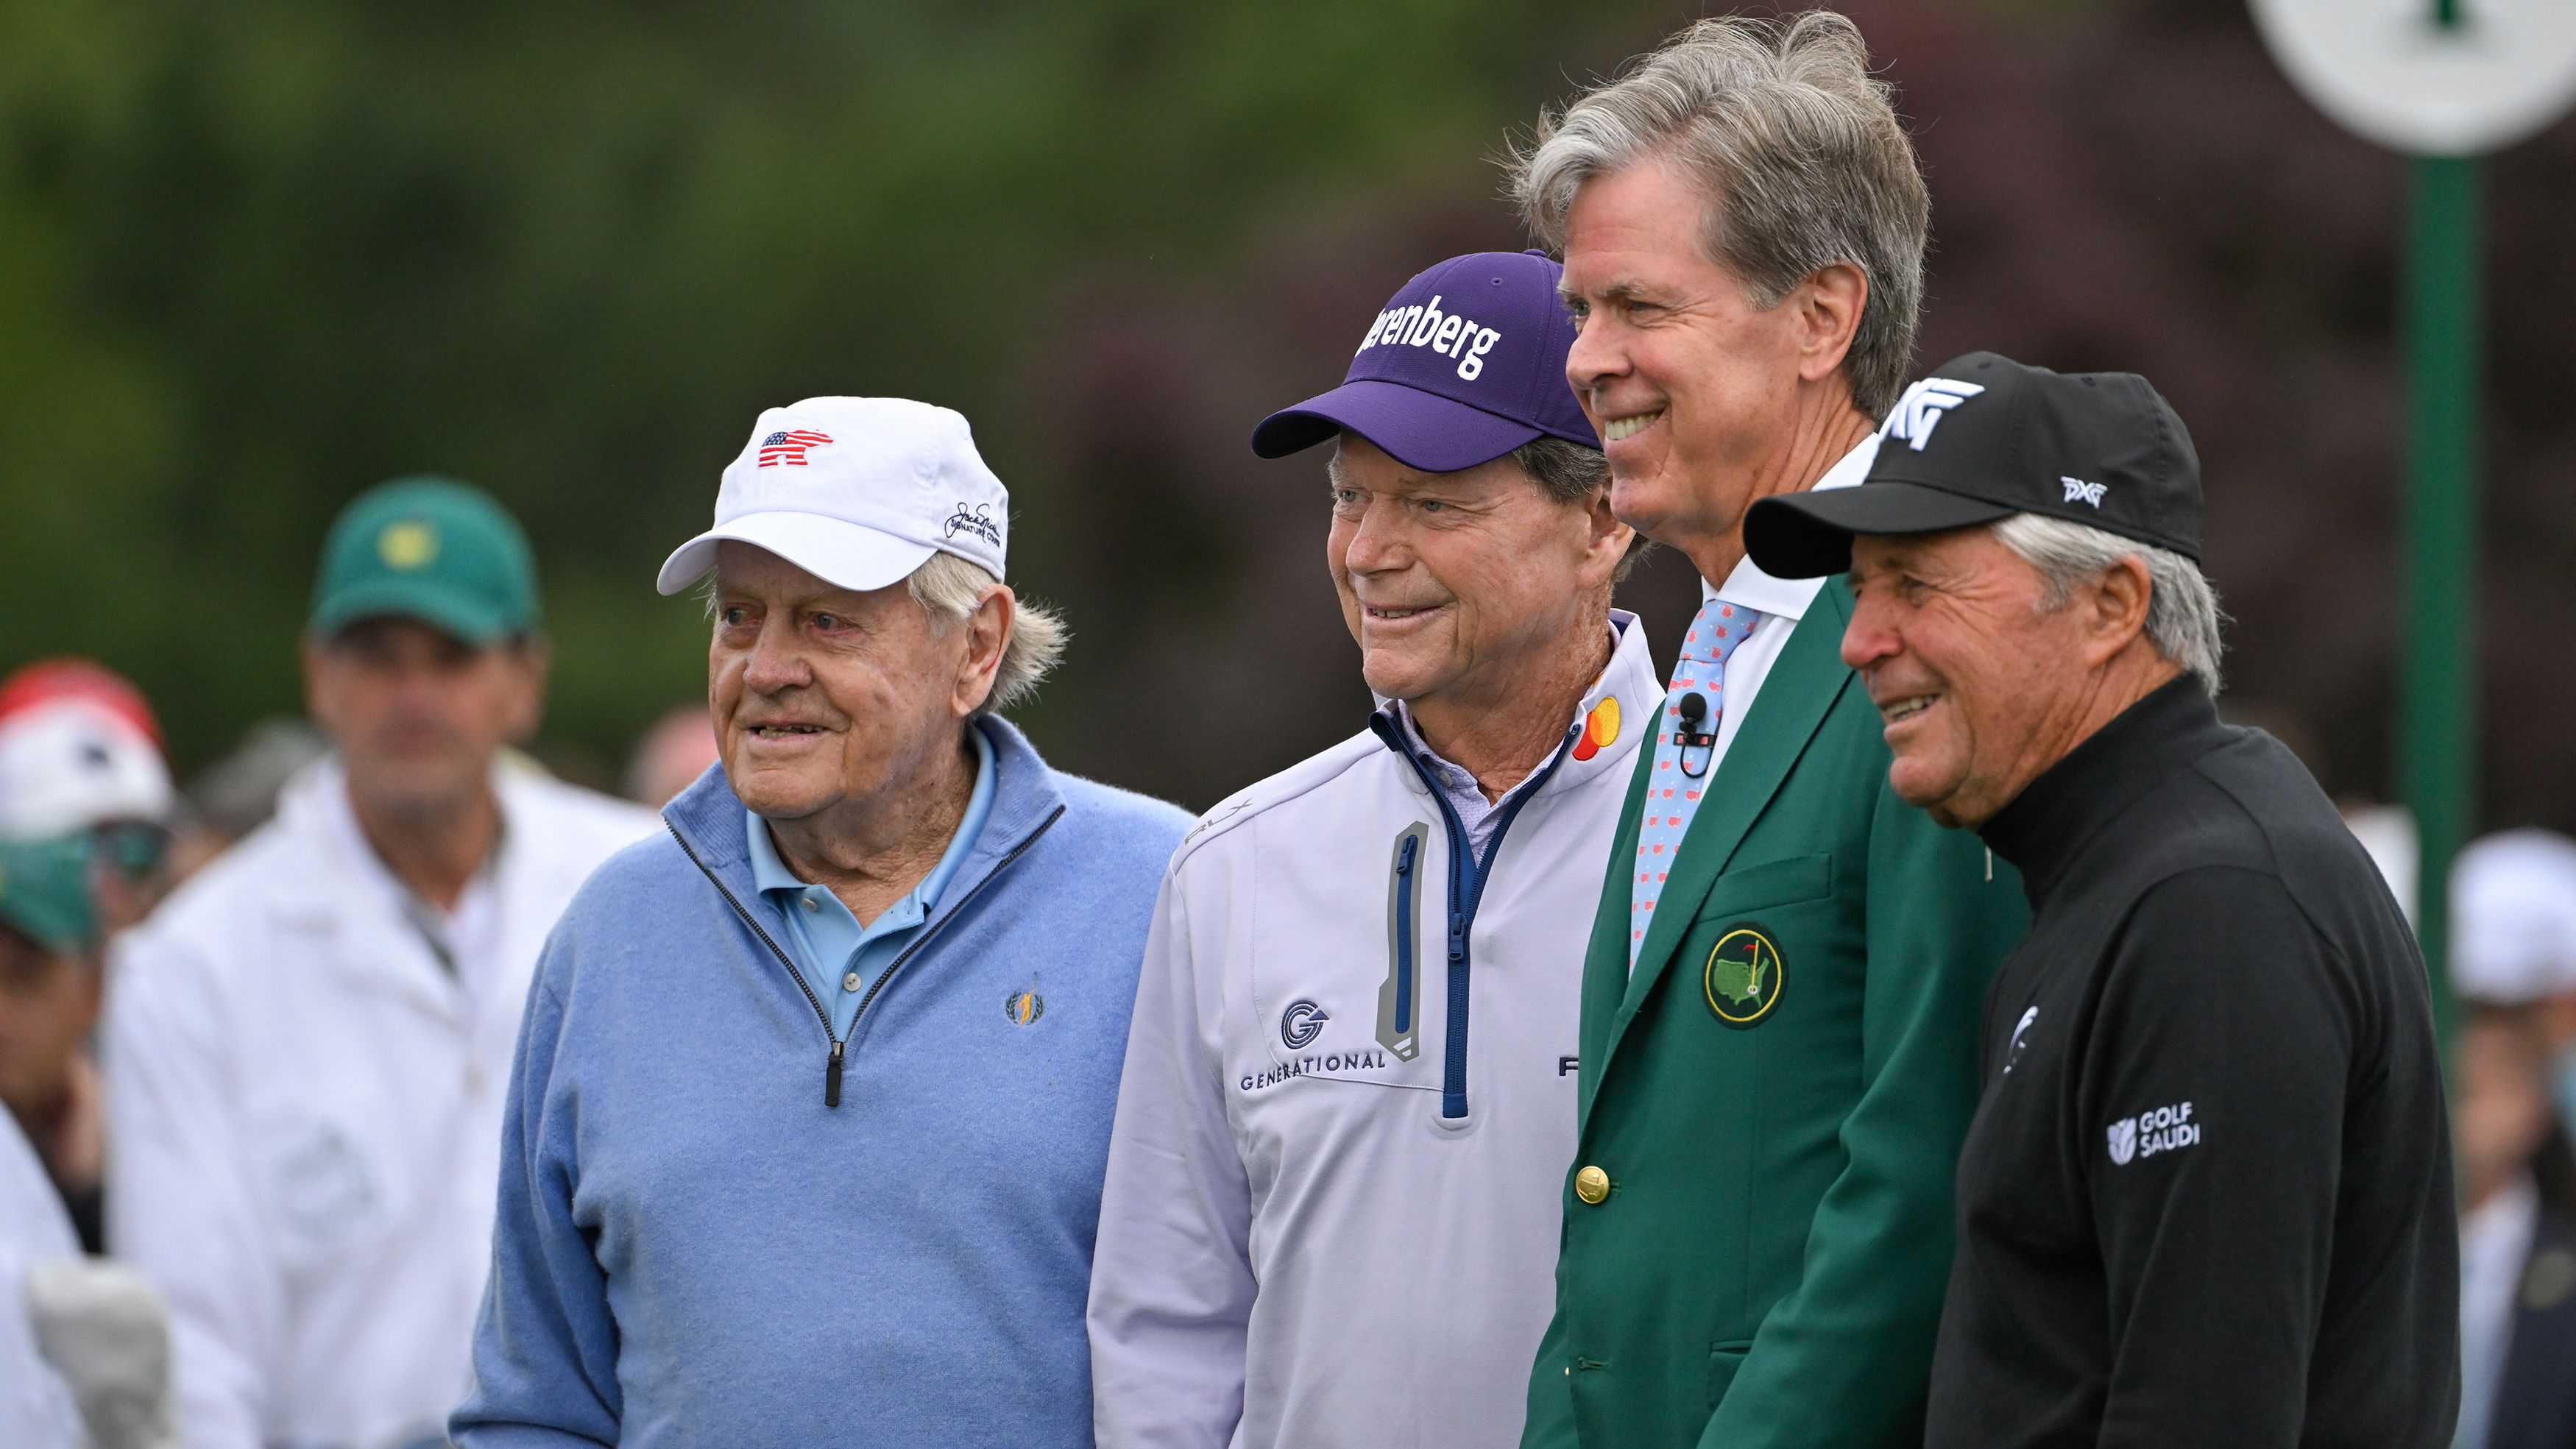 Honorary starters Jack Nicklaus, Tom Watson and Gary Player of pose with Masters chairman Fred Ridley.